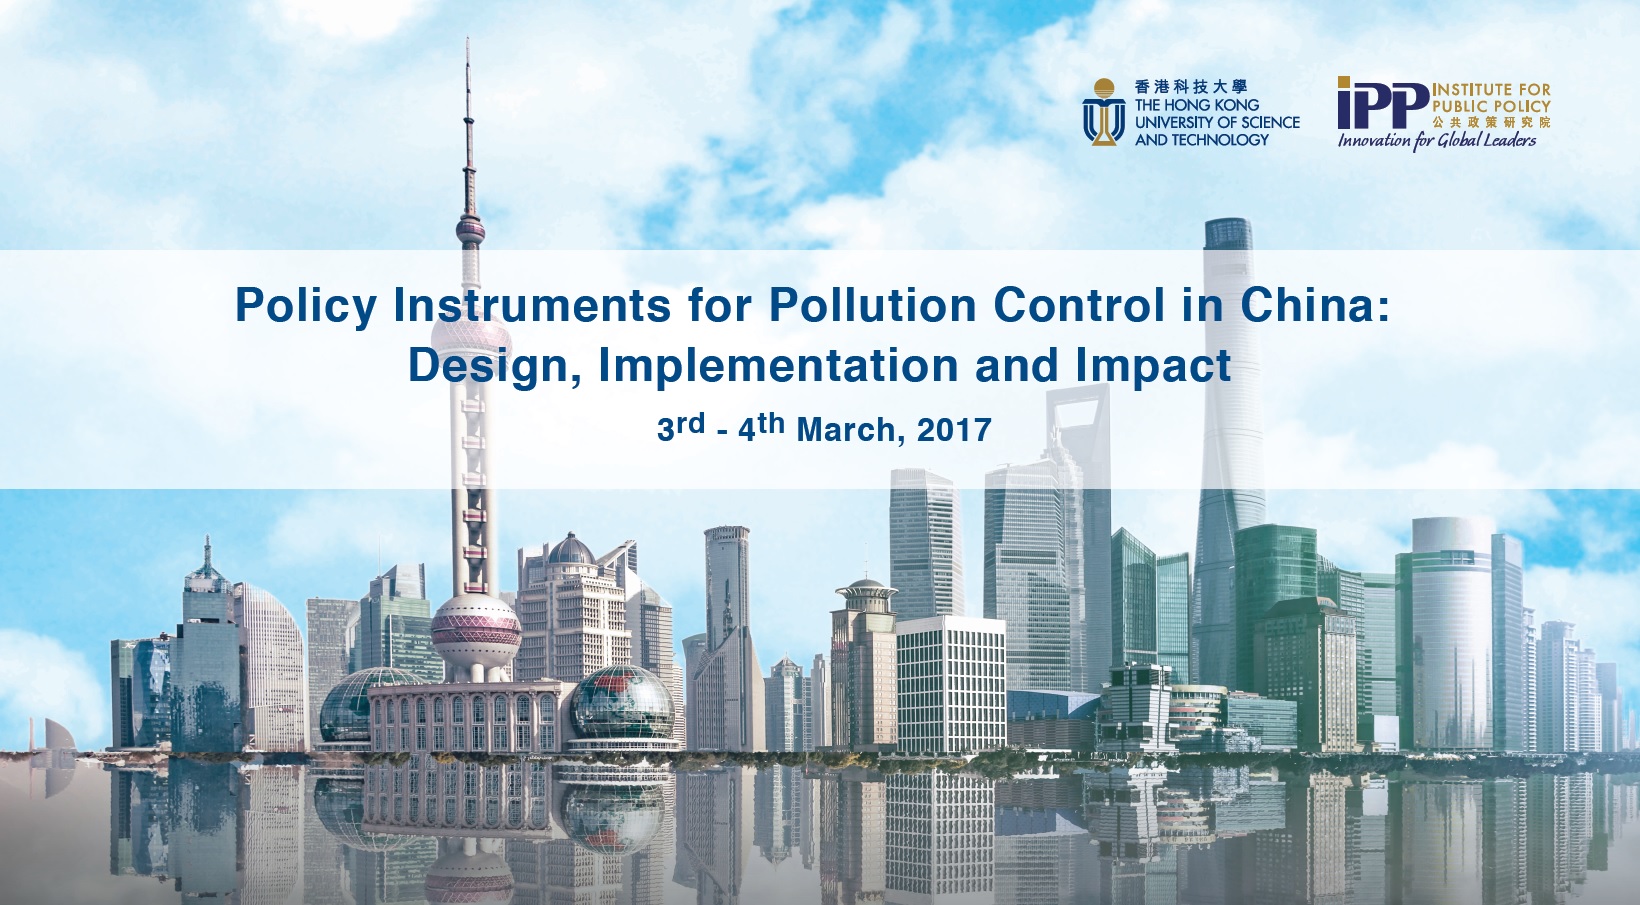 Workshop on "Policy Instruments for Pollution Control in China: Design, Implementation and Impact"